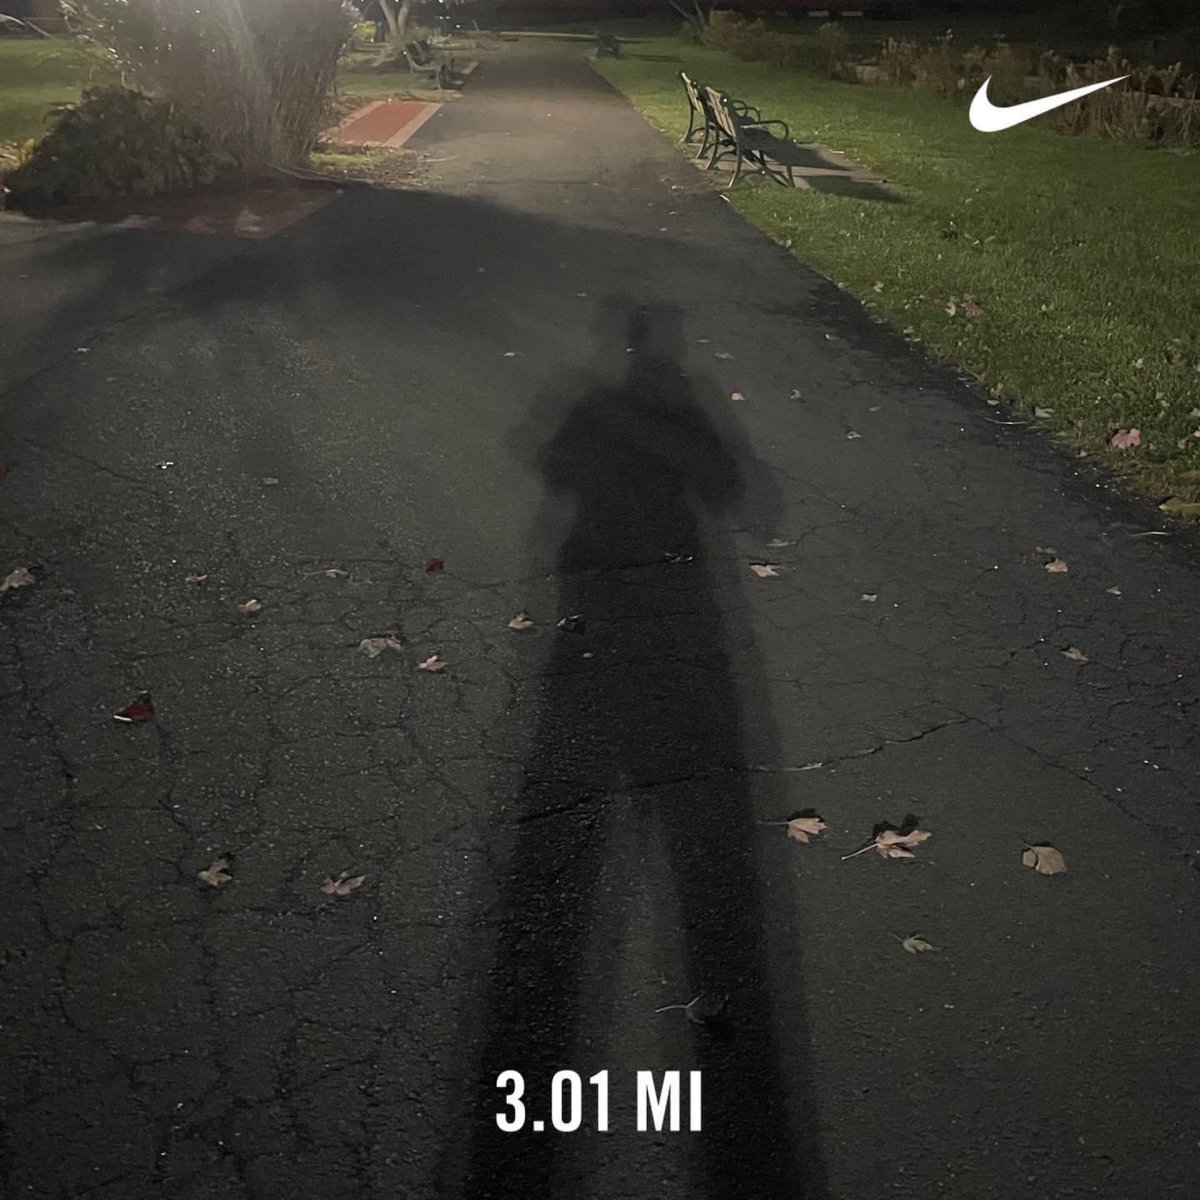 I reached another post injury milestone. Today I ran up and down that hill without mentally thinking. It’s been a journey, the effort to strengthen in the gym is paying off #nikerunning #justdoit #focusedonmyfocus #rehabjourney #radicalselfcare #soundbodysoundmind